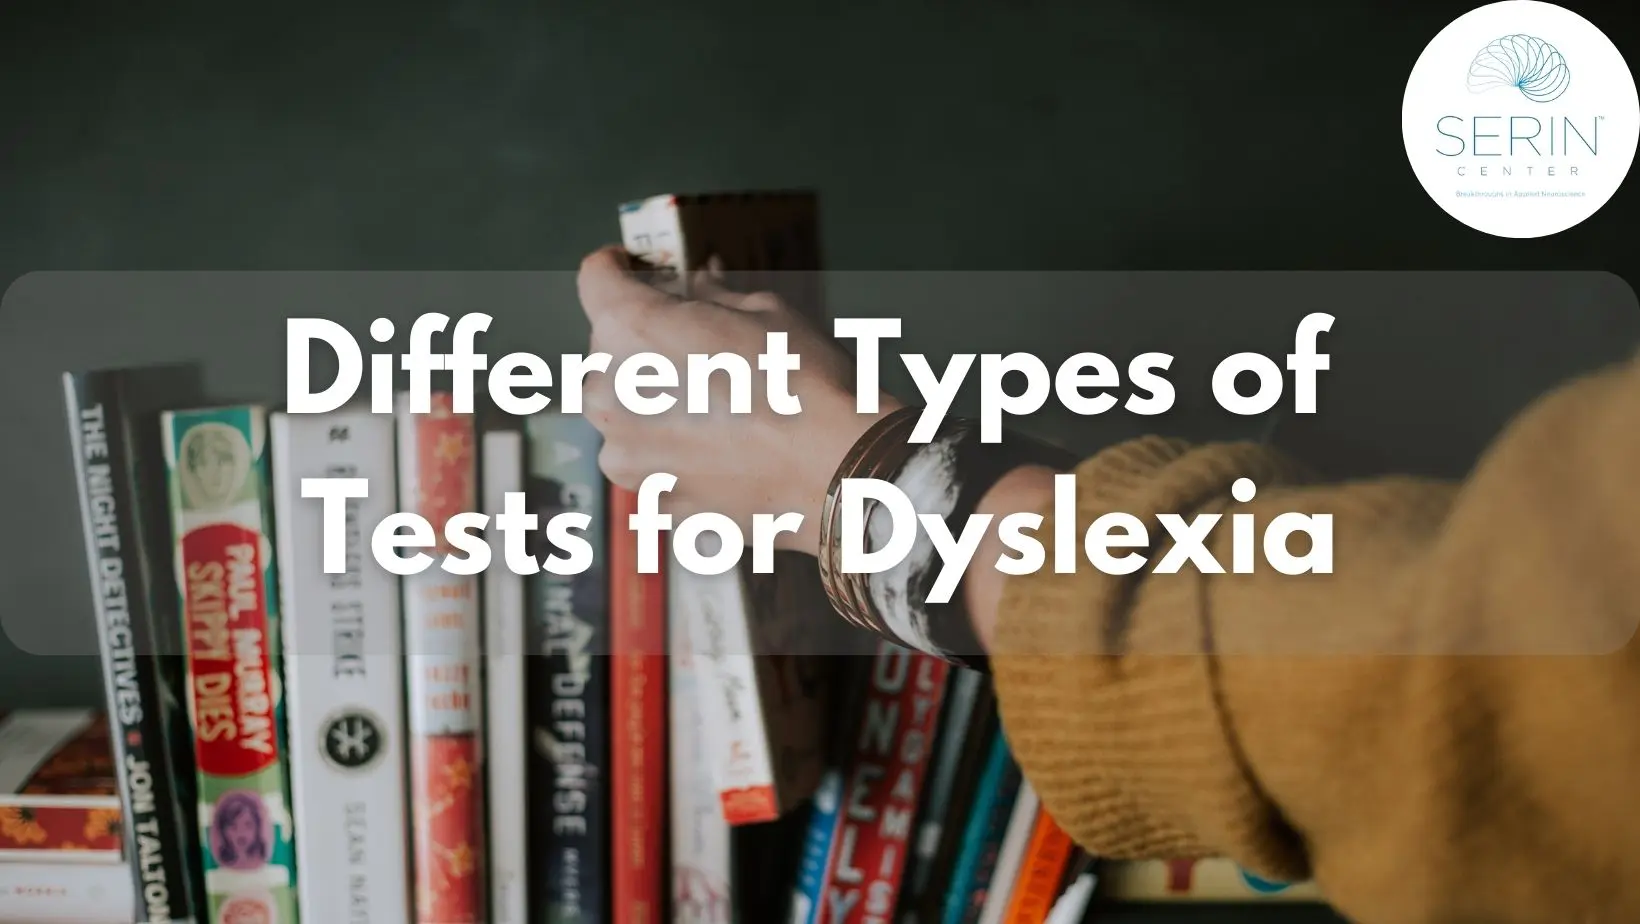 Hand reaching for book on a shelf. Dyslexia tests.